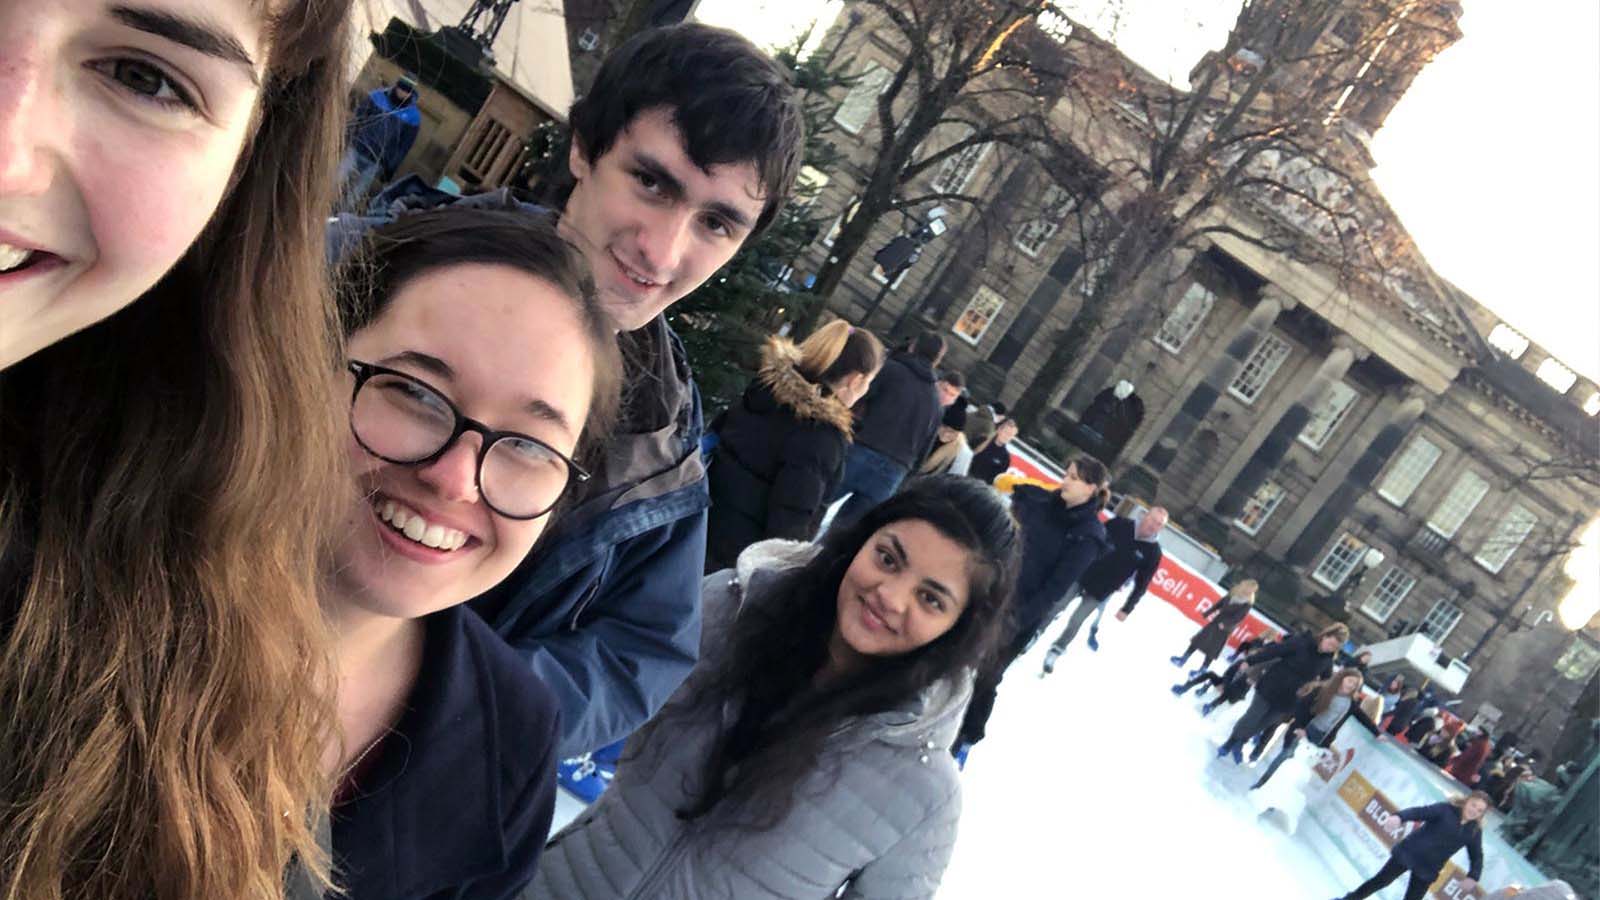 Maria and her friends ice skating in Dalton Square